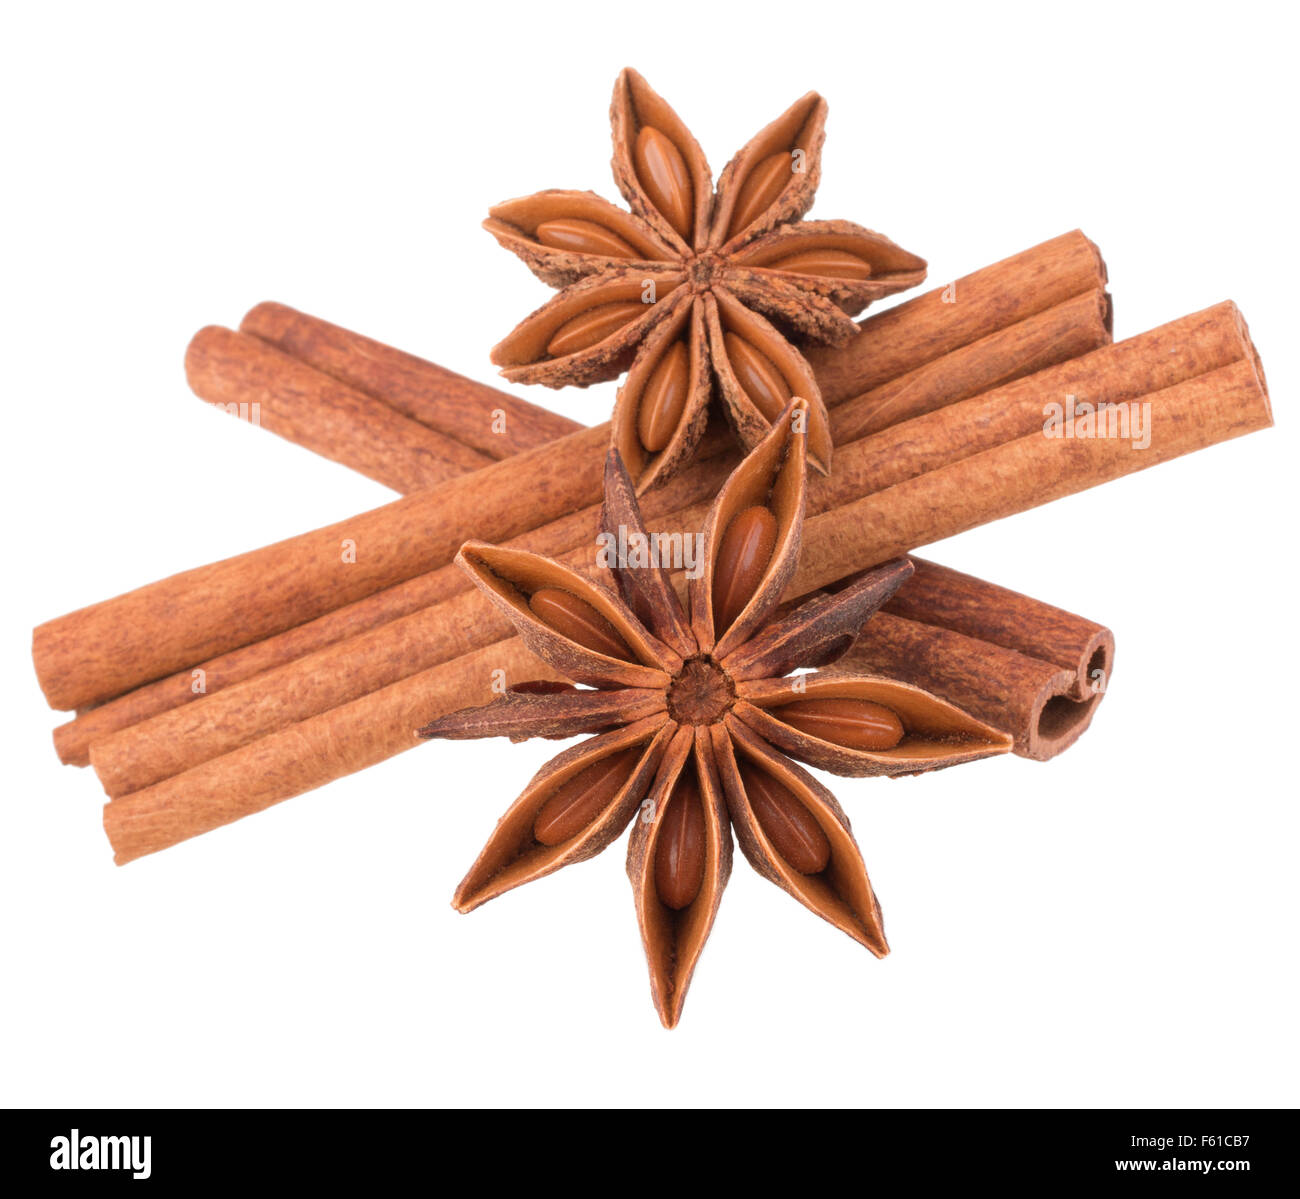 cinnamon stick and star anise spice isolated on white background closeup Stock Photo